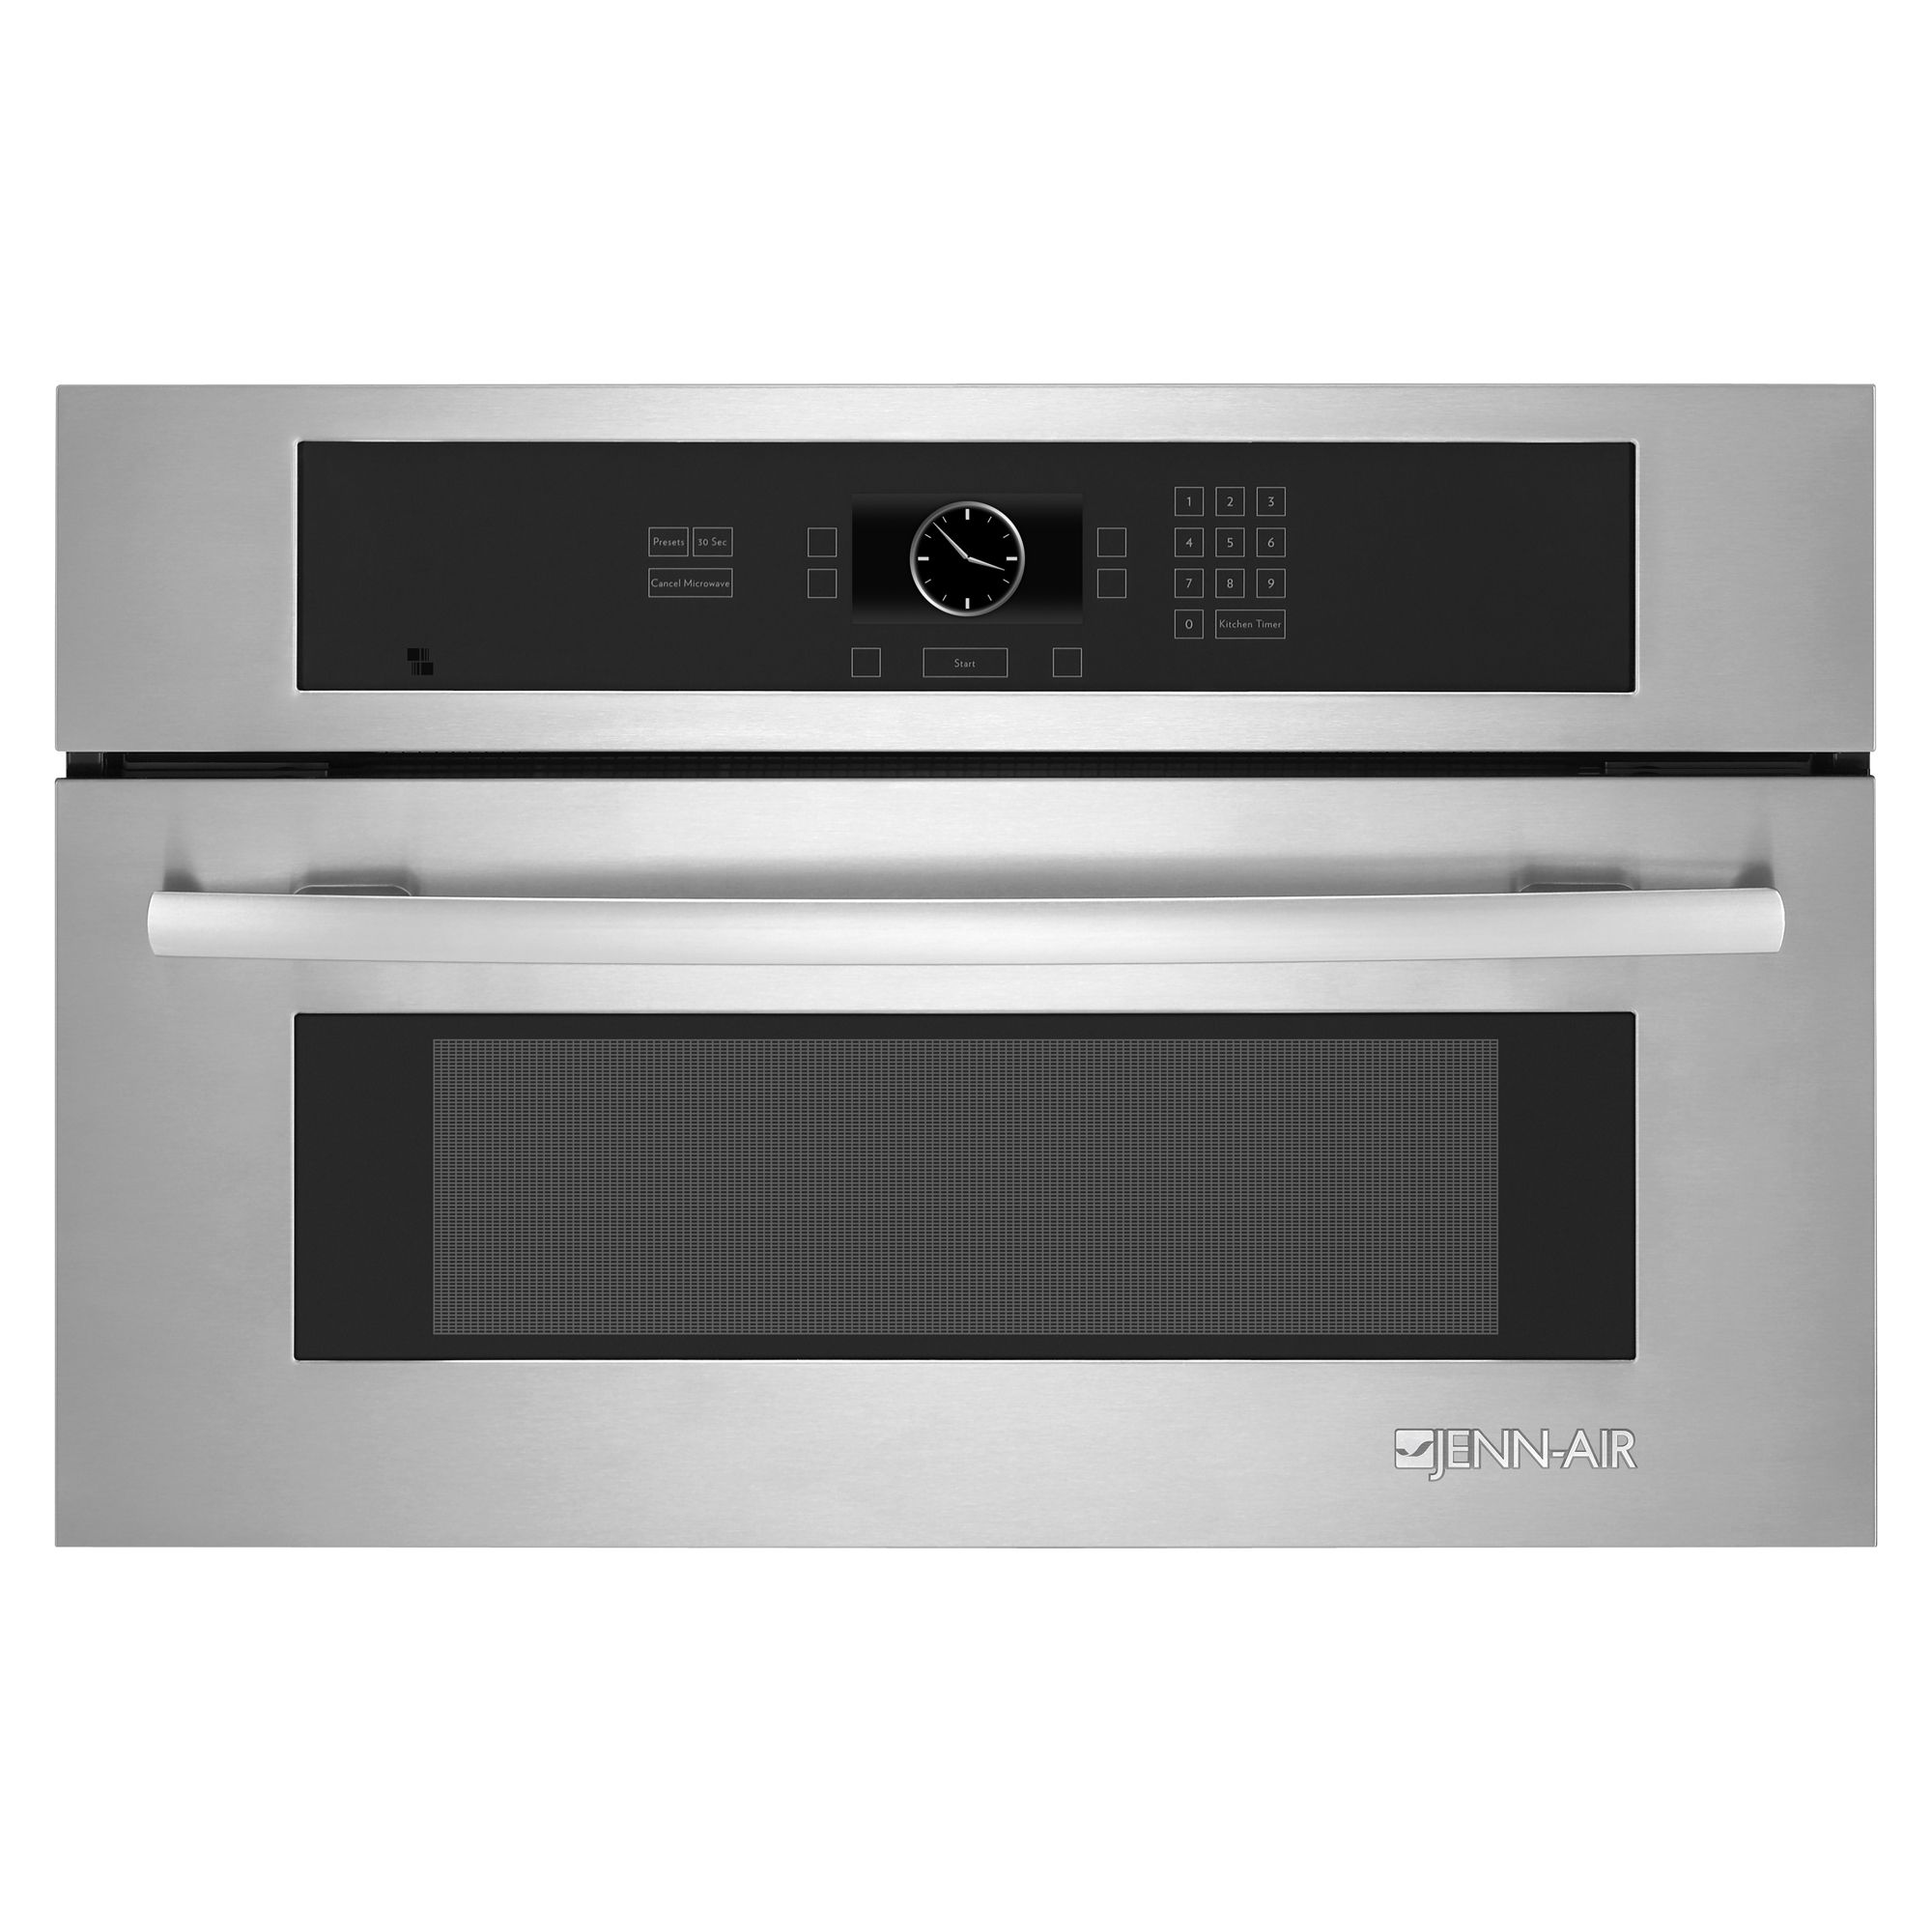 30" Built-In Convection Microwave logo